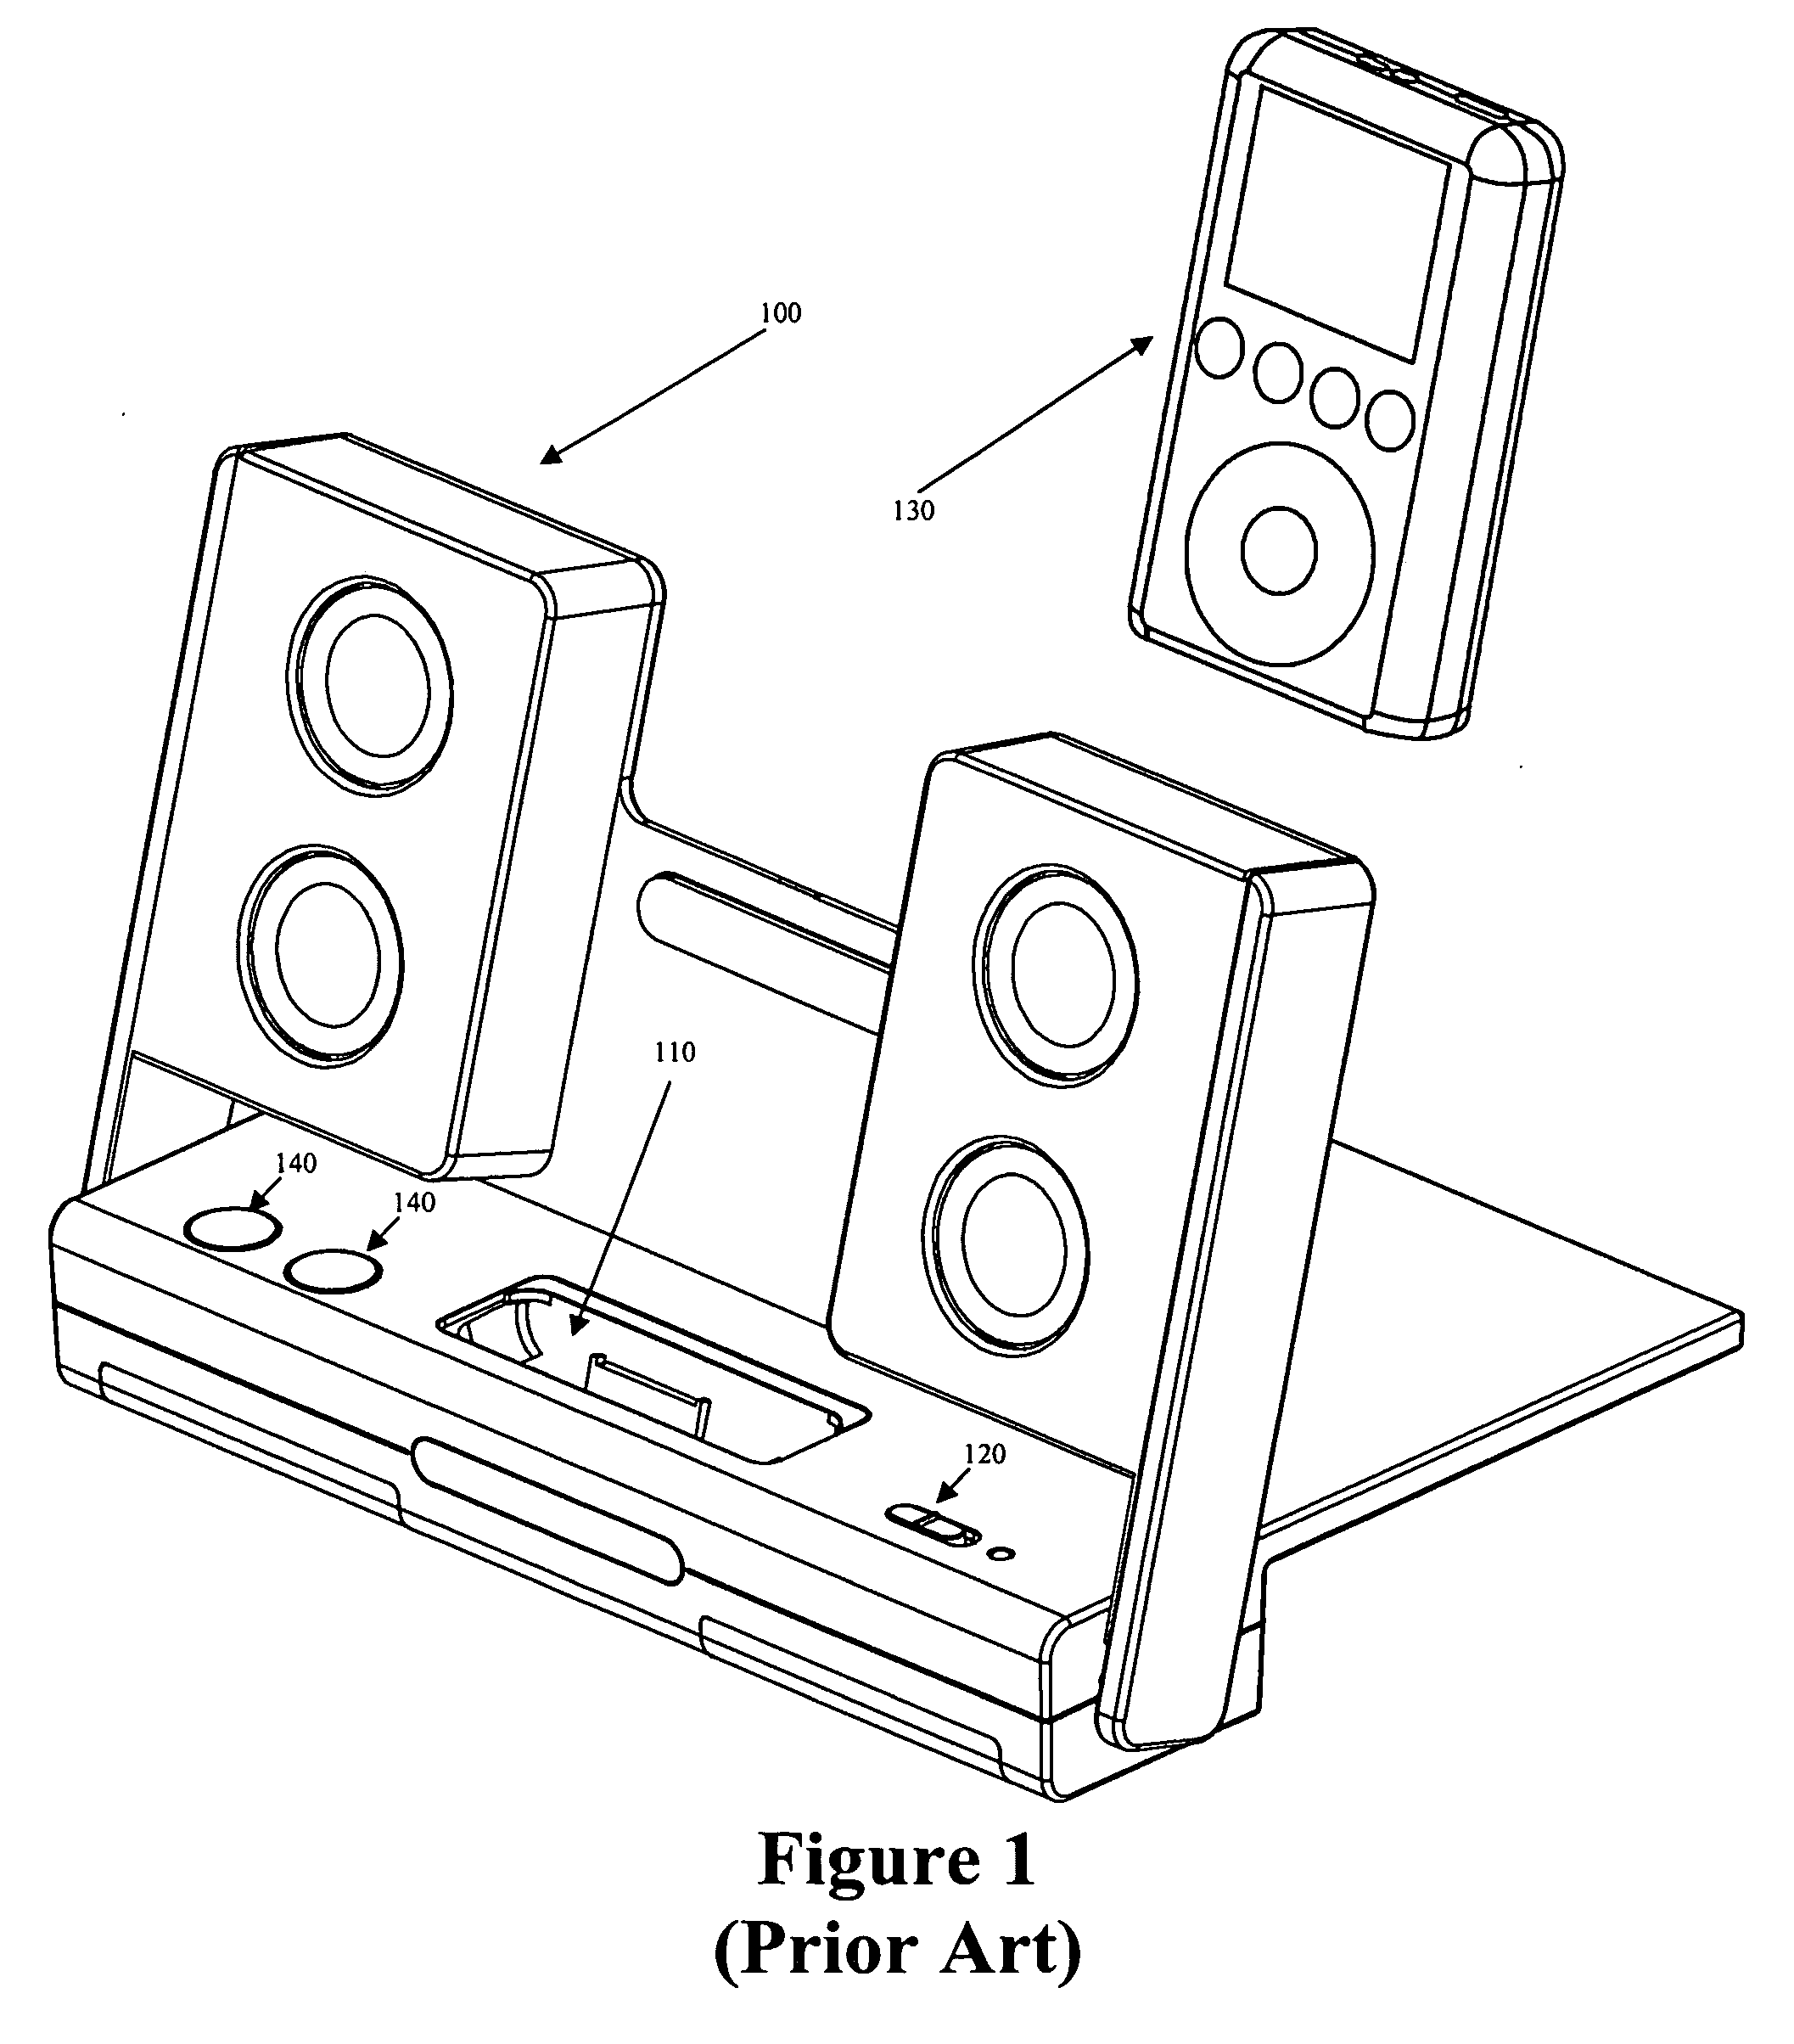 Portable media player emulator for facilitating wireless use of an accessory